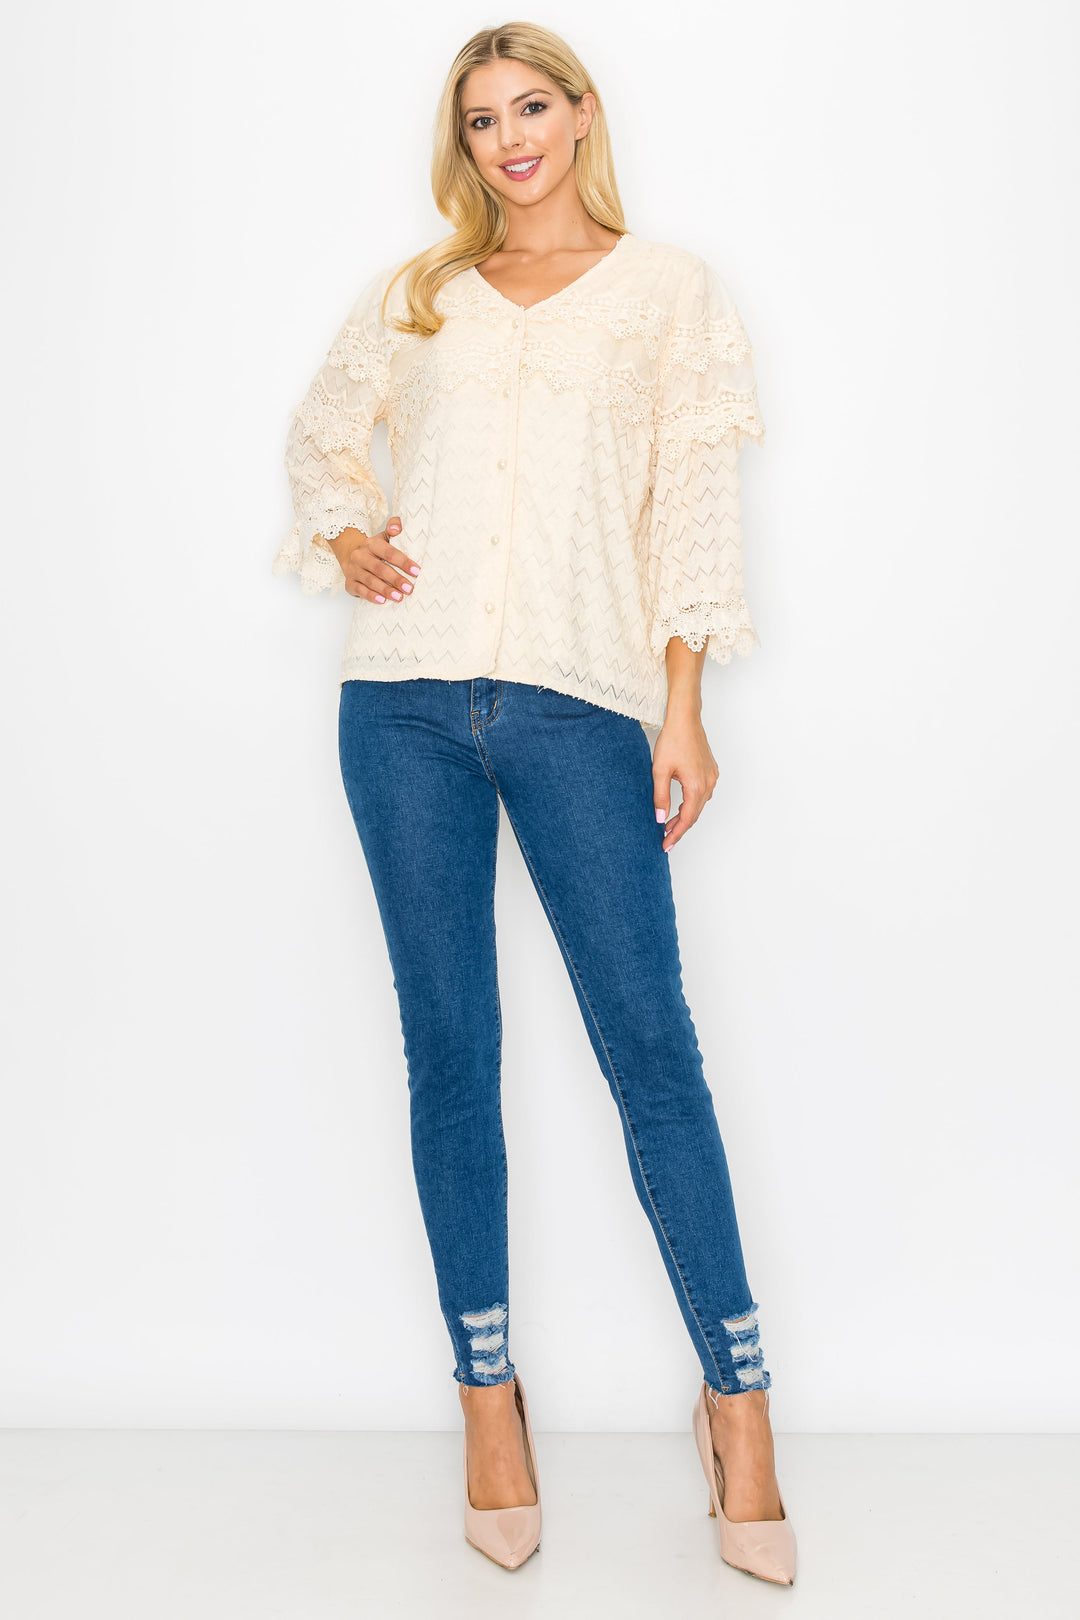 Kelly Anne Stretch Knit Mesh & Lace Top